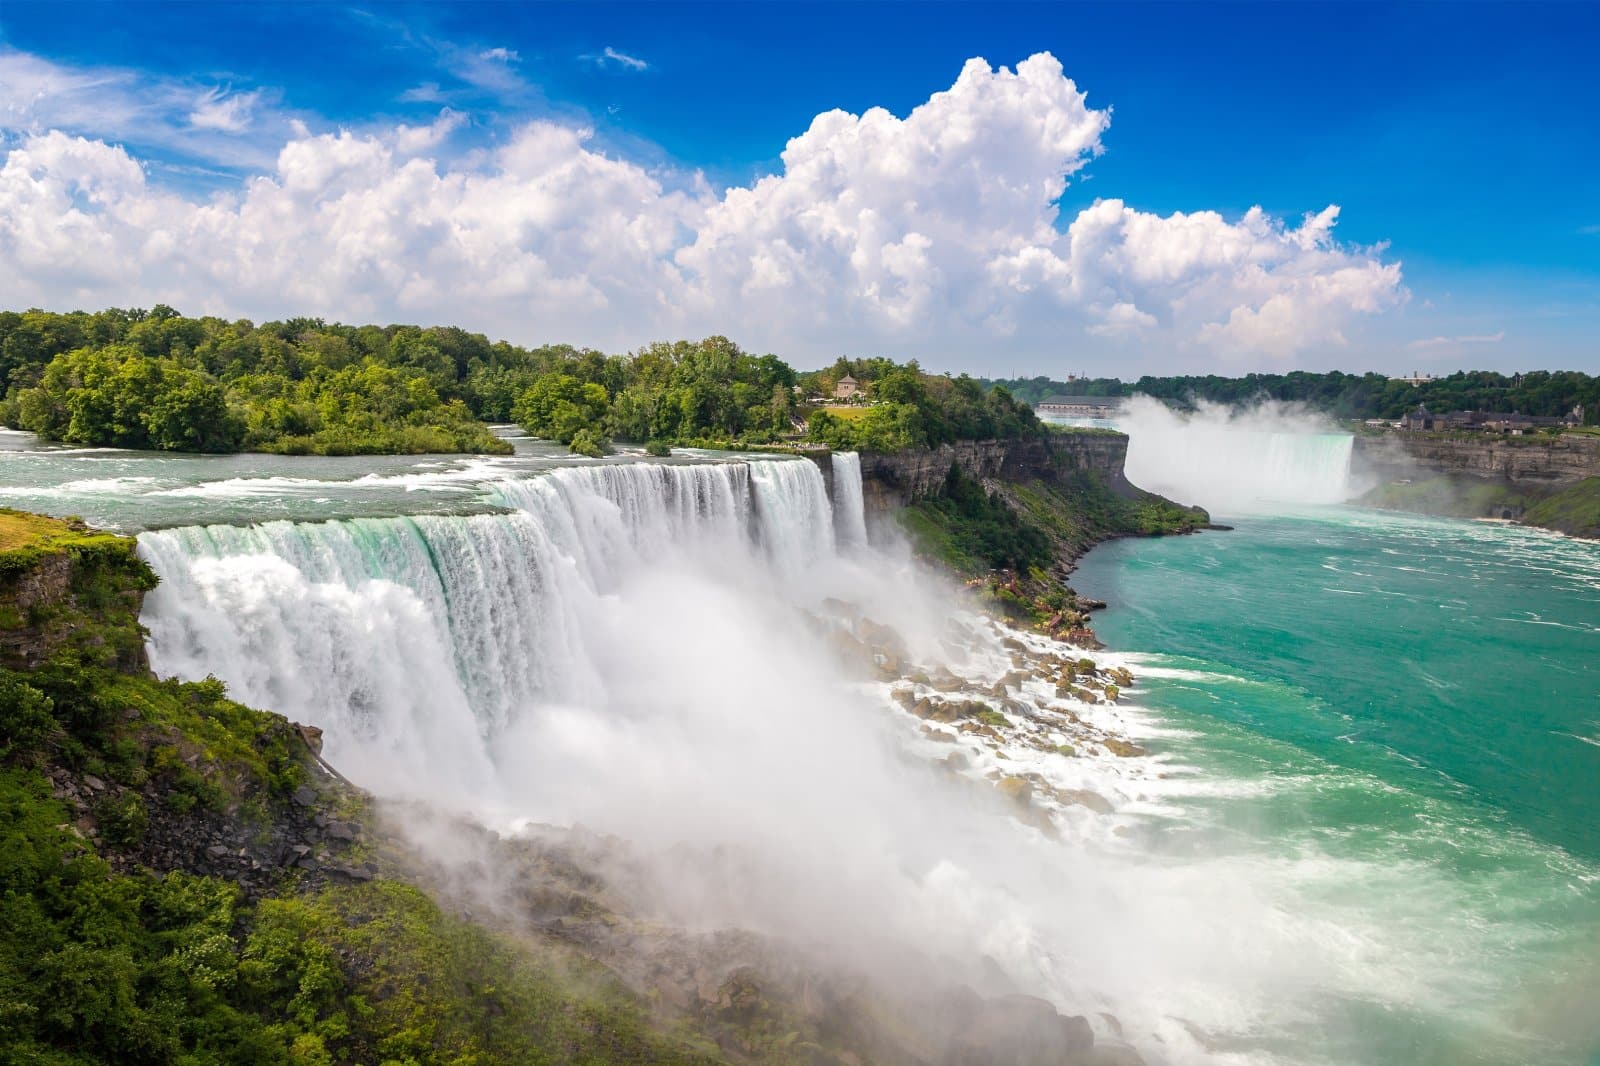 Image Credit: Shutterstock / Sergii Figurnyi <p><span>Witness the awe-inspiring power of Niagara Falls. Don’t miss the boat tour that gets you up close and wet. Parking can be pricey and scarce.</span></p>